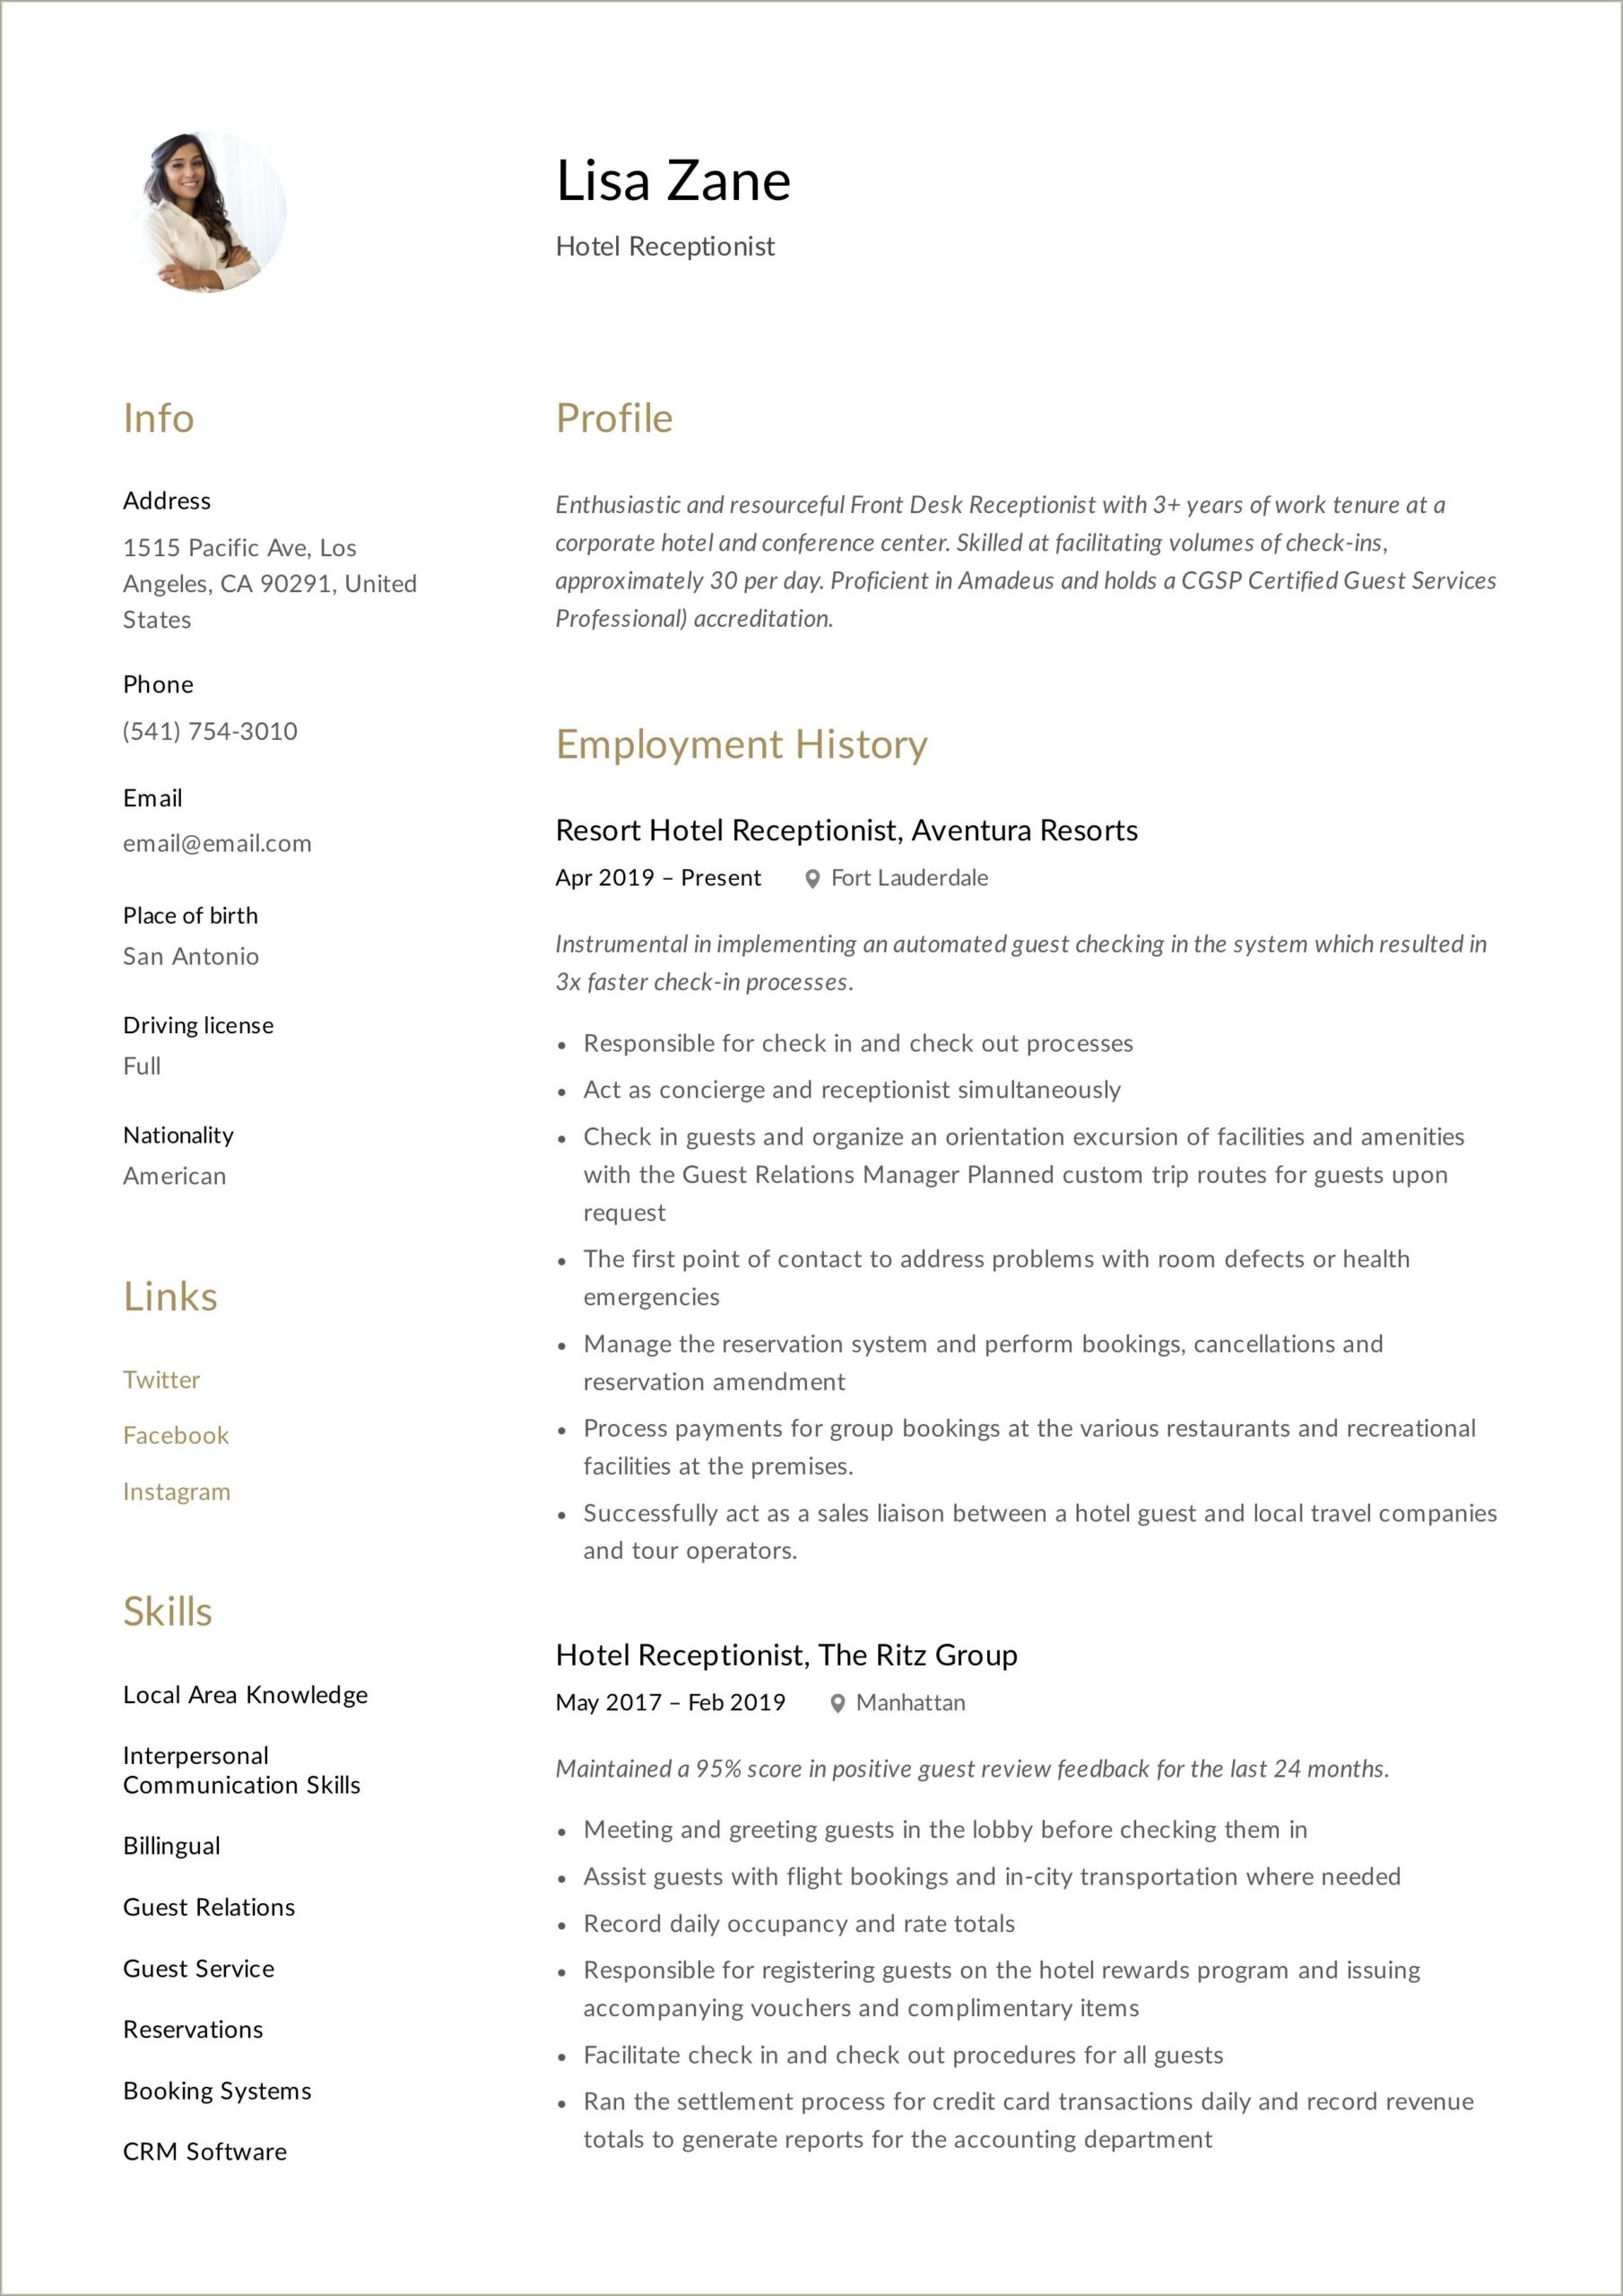 Sample Resume For Hotel Receptionist With No Experience